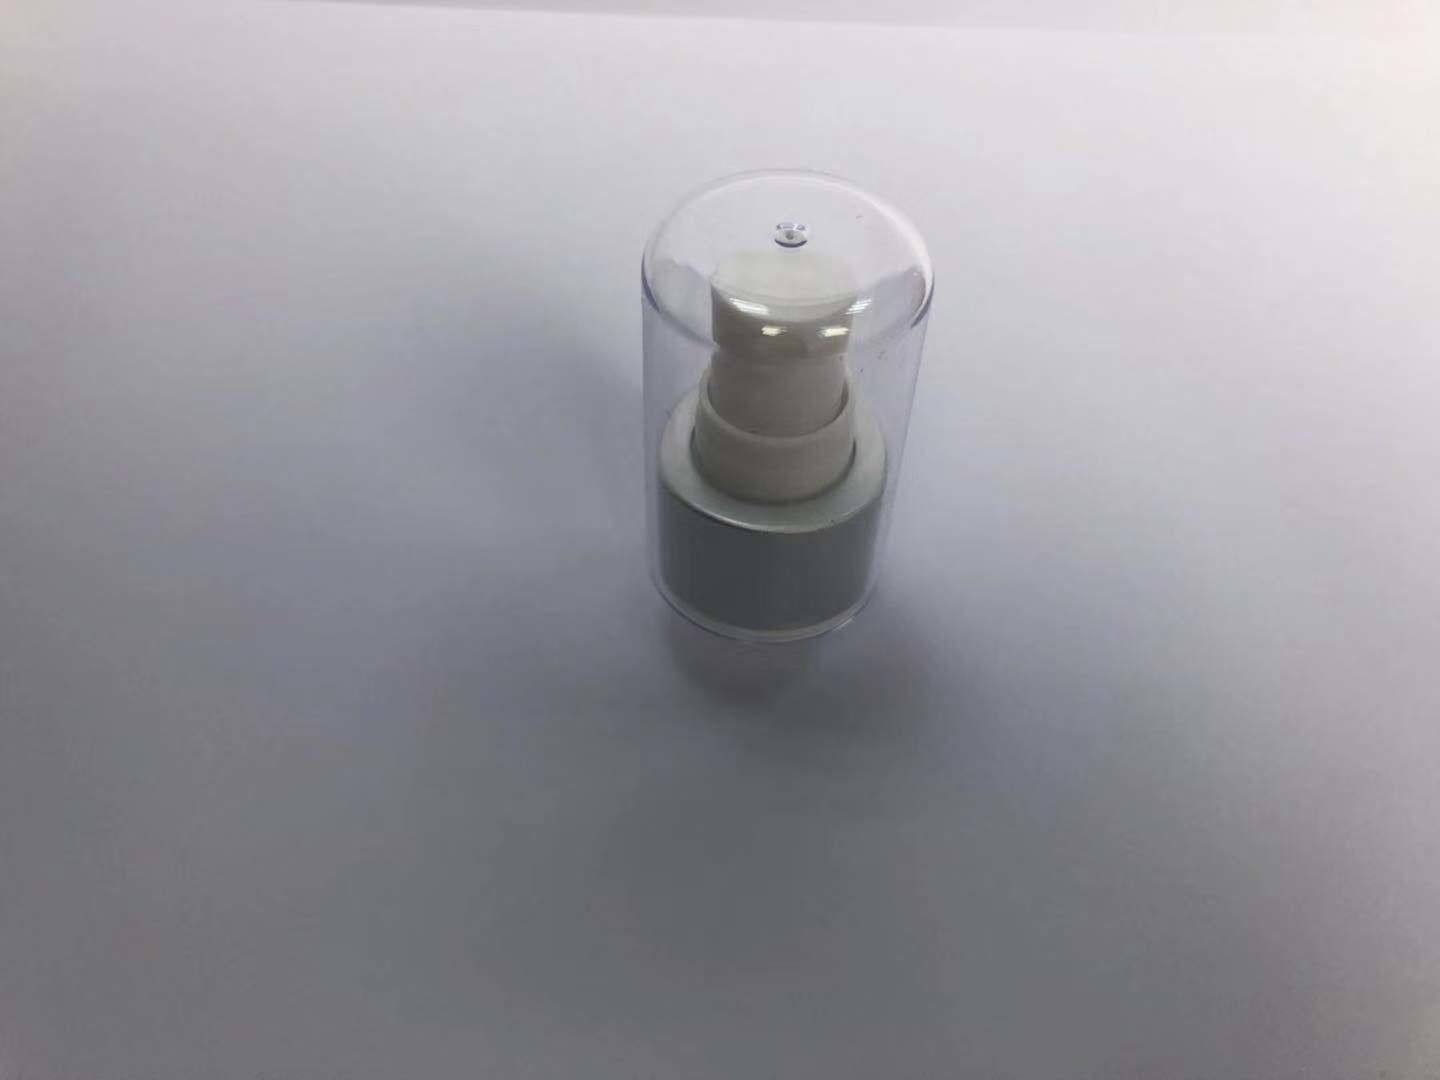 Buy Silver Closure Upscale Cream Pump Dispenser For Personal Care Products at wholesale prices